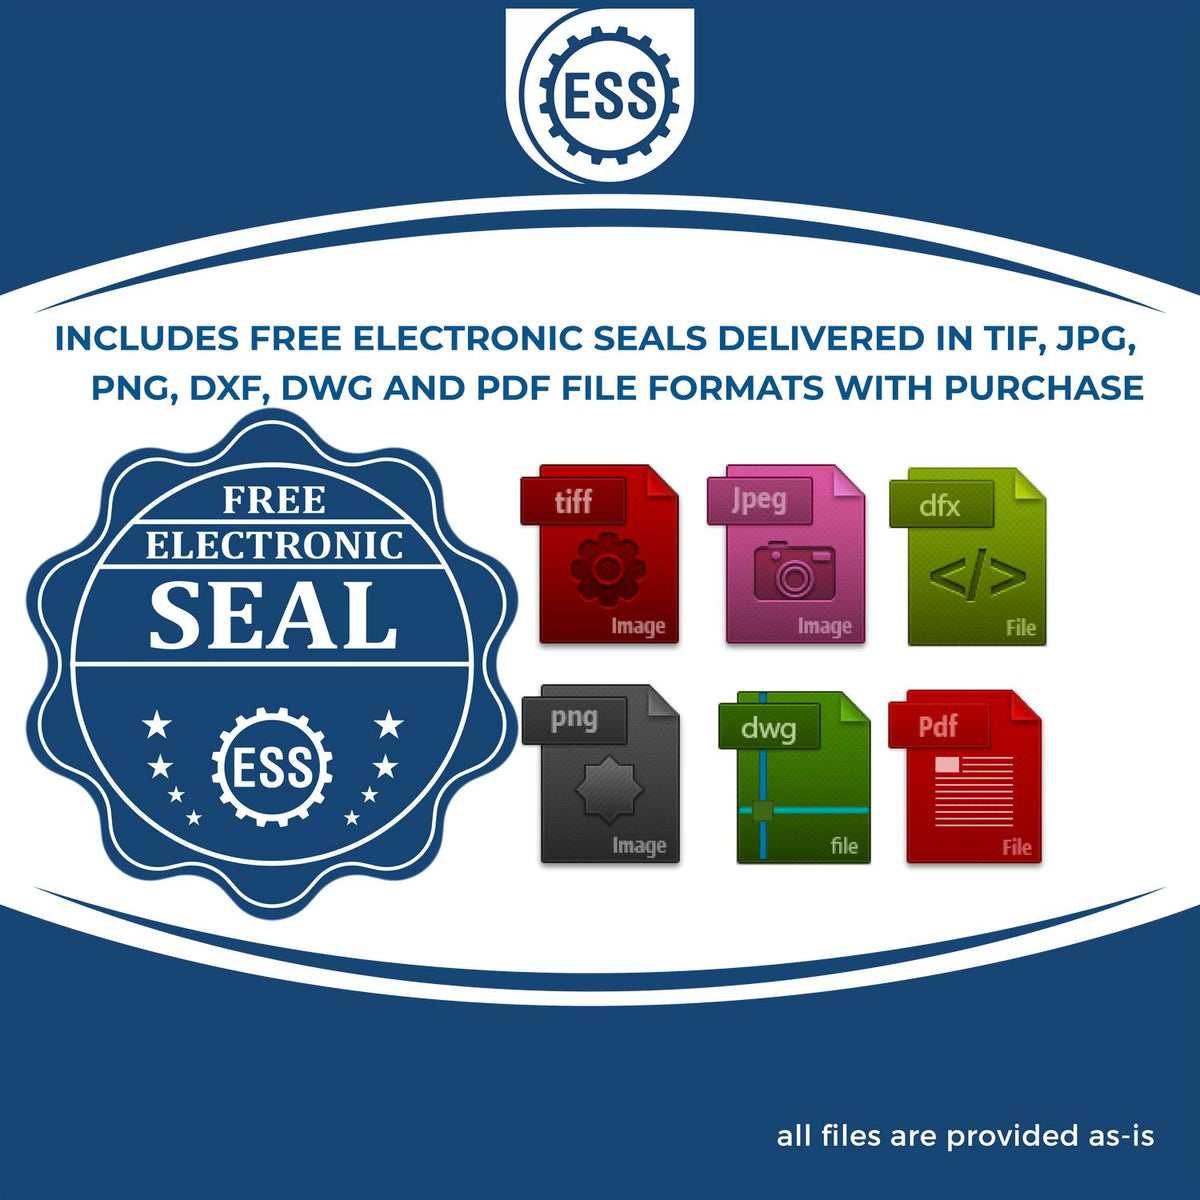 An infographic for the free electronic seal for the Premium MaxLight Pre-Inked Idaho Geology Stamp illustrating the different file type icons such as DXF, DWG, TIF, JPG and PNG.